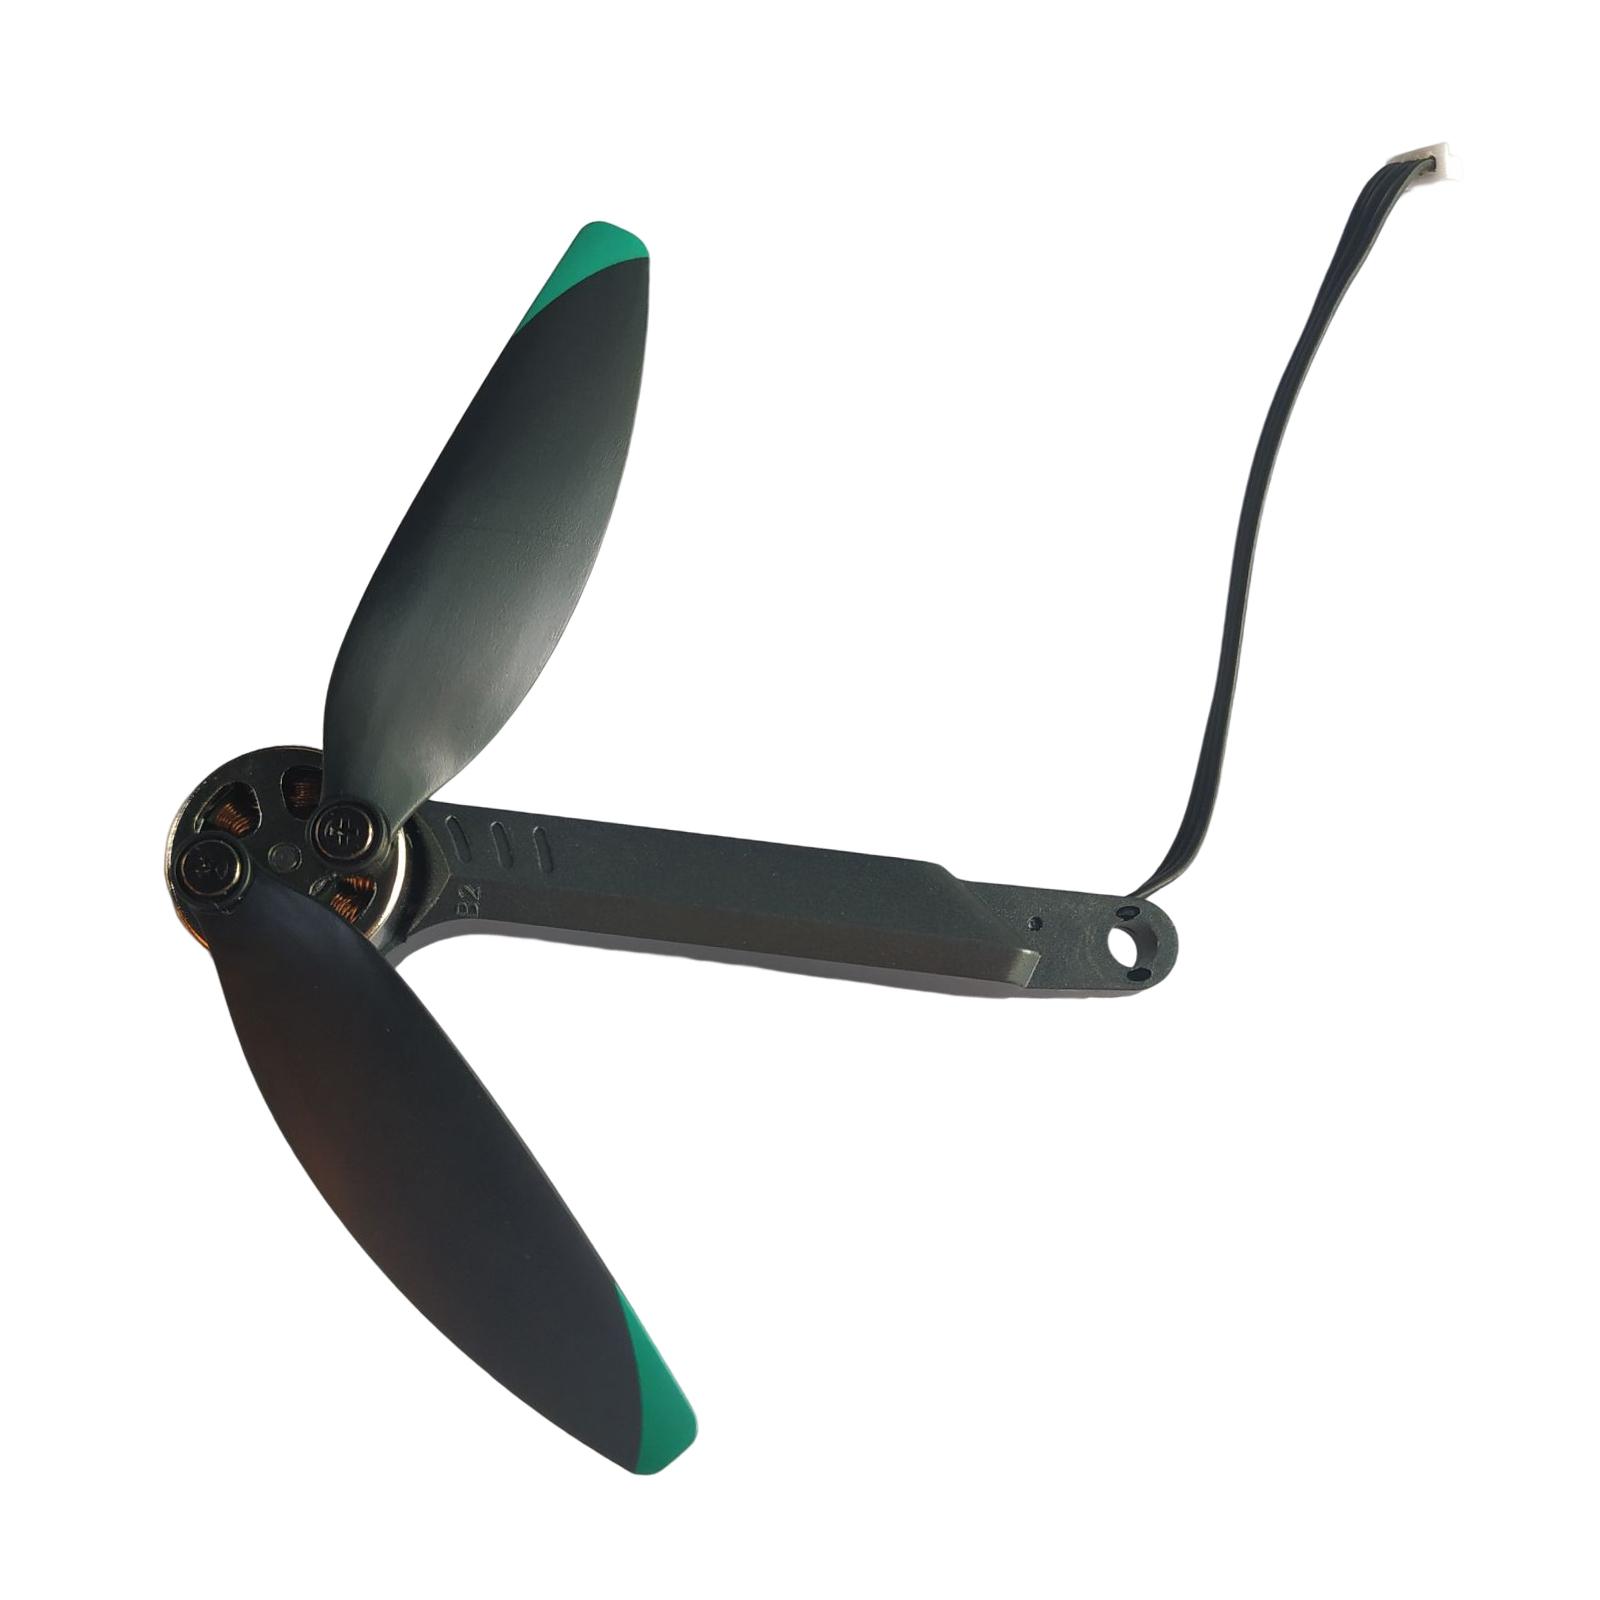 Left lower motor arm with propellers for S138 drone